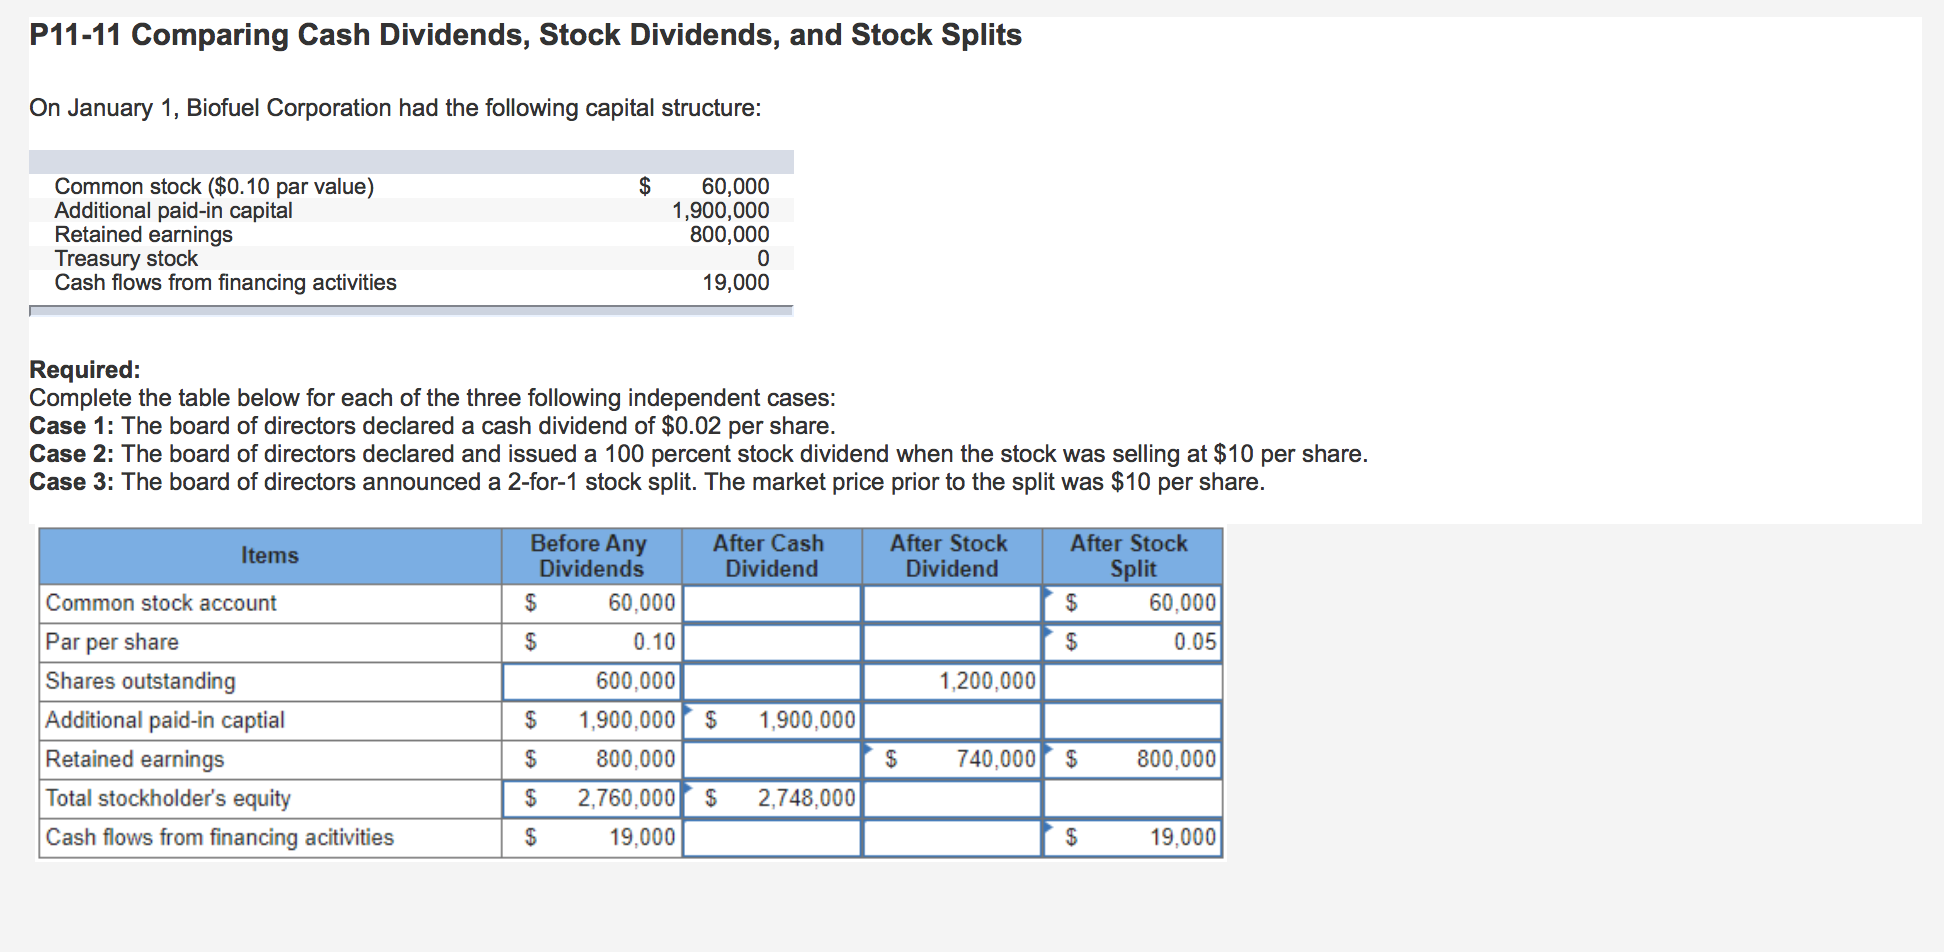 Family Control, Stock Price Levels, and Stock Split Activity [1